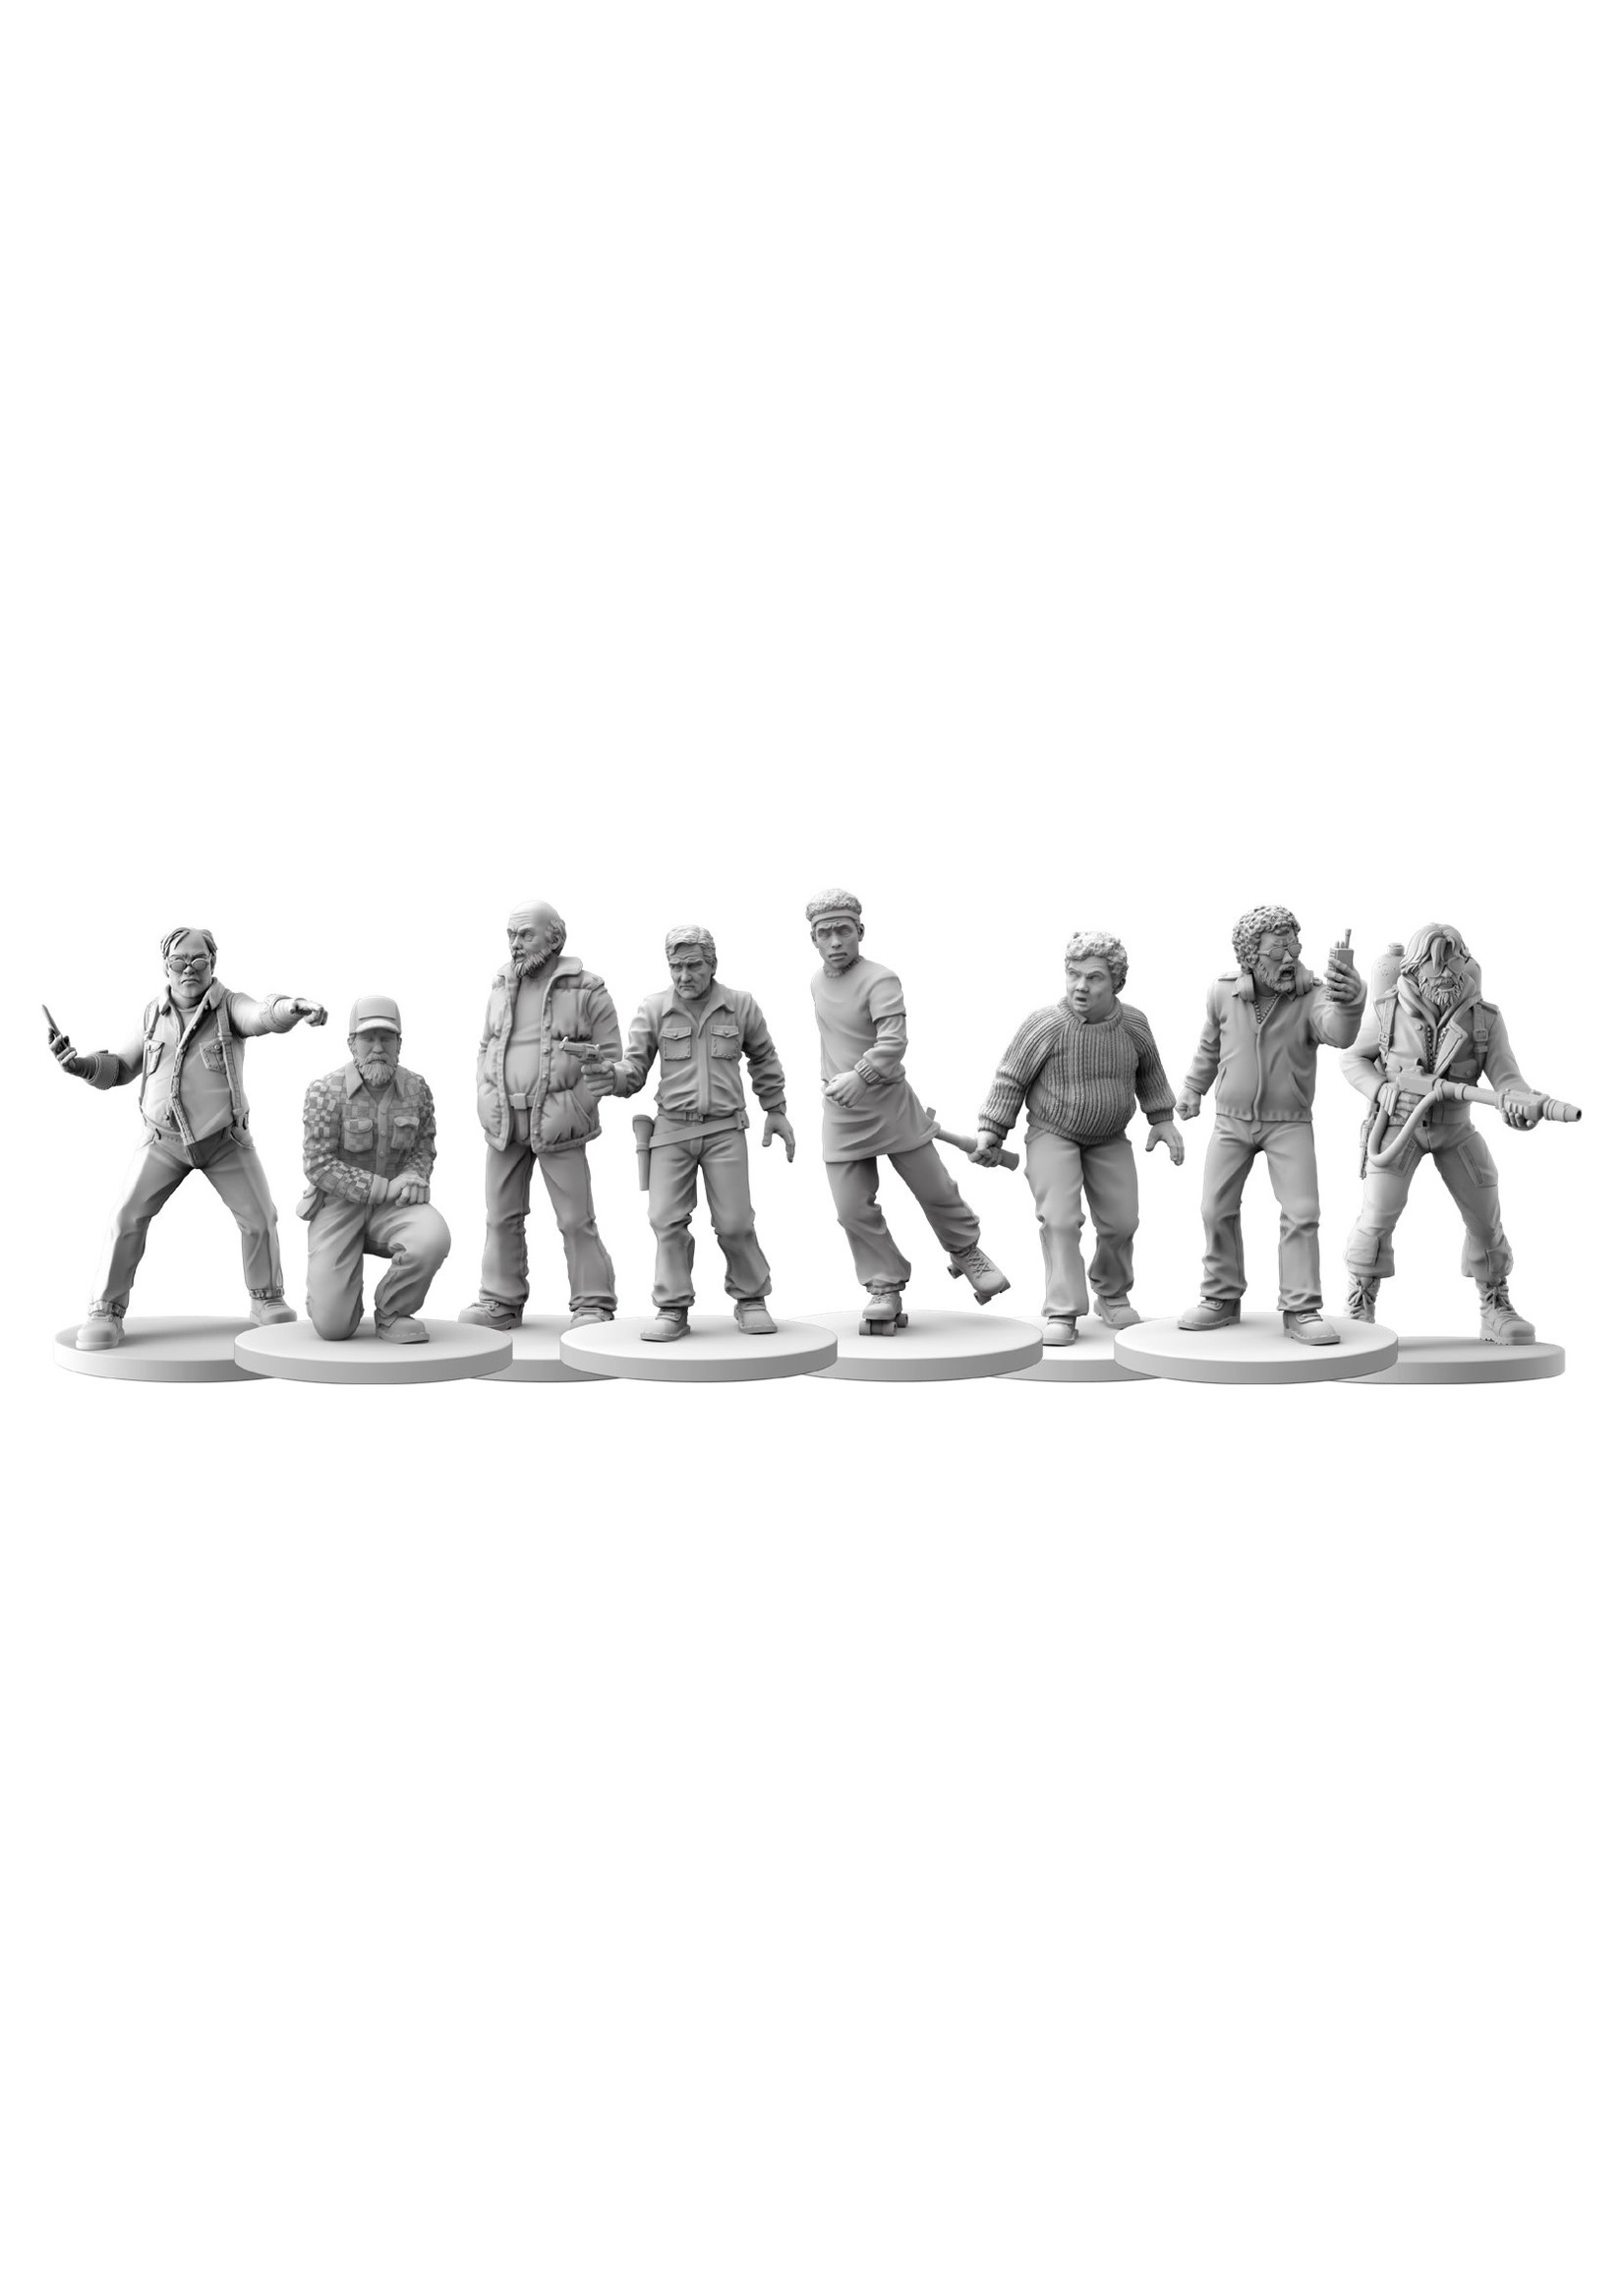 ARES GAMES THE THING HUMAN MINIATURES SET